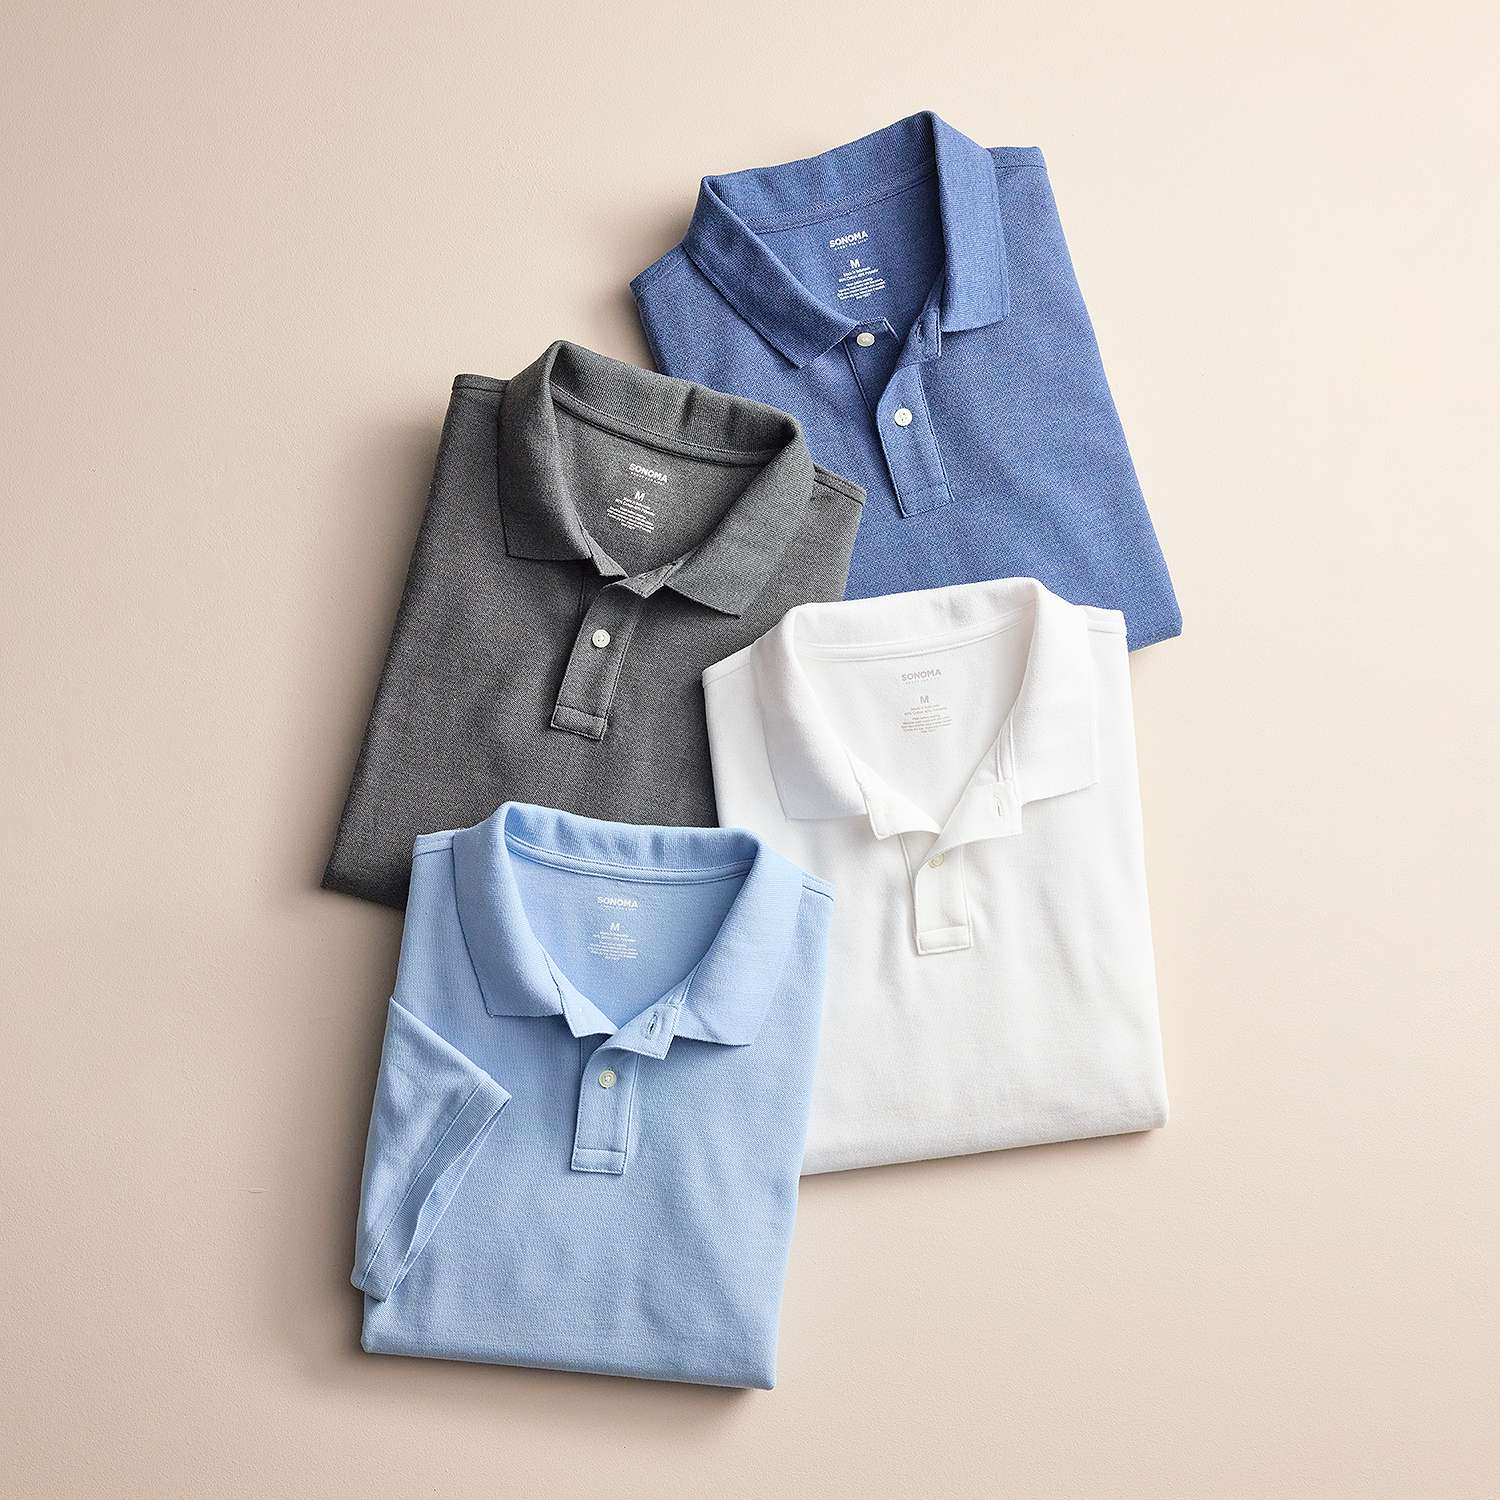 Sonoma Goods For Life Men's Pique Polo Shirt (Various) $8.48 + Free Store Pickup at Kohl's or Free Shipping on $49+